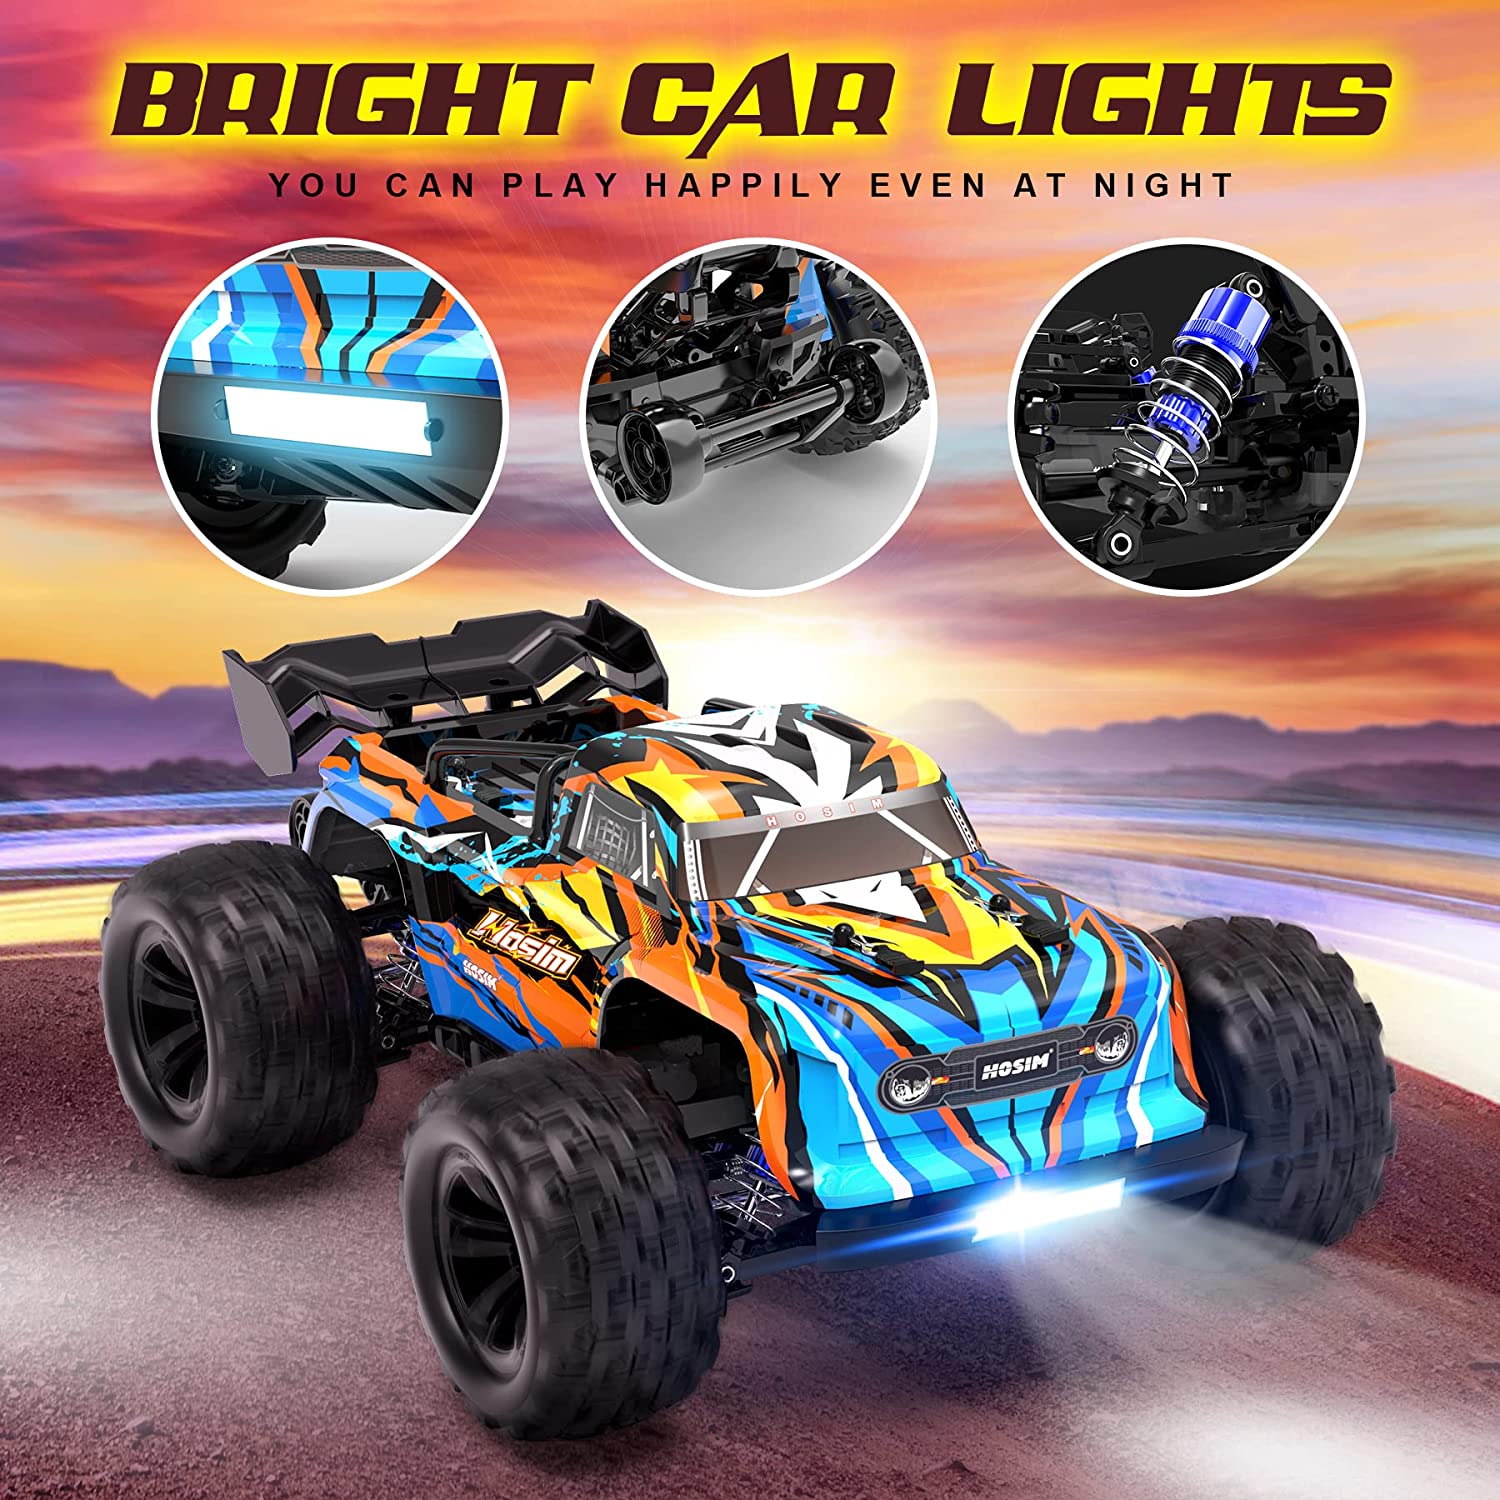 Hosim 1:16 Scale 40+KPH All Terrain RC Car,4WD Waterproof High Speed Electric Toy Off Road RC Monster Truck Vehicle Crawler for Boys Kids and Adults